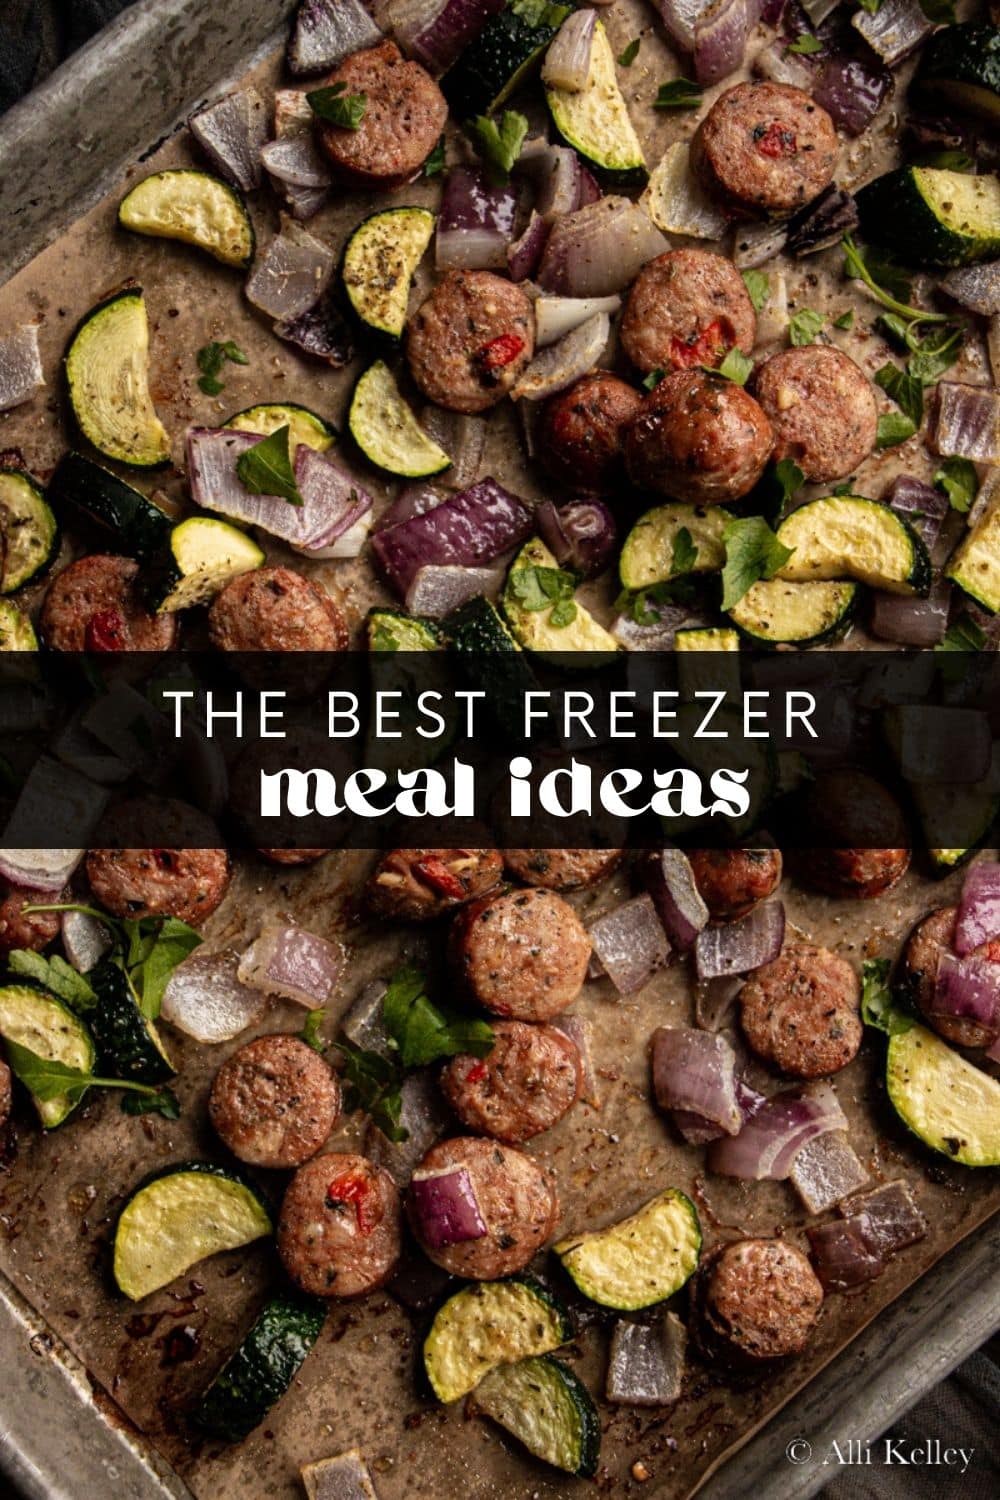 There's nothing better than having a delicious, home-cooked meal ready to go when you're in a rush or don't feel like cooking. These best freezer meals are perfect for busy families, meal preppers, new parents, or anyone looking to save time. They include everything from casseroles to crockpot meals and even options for freeze drying!